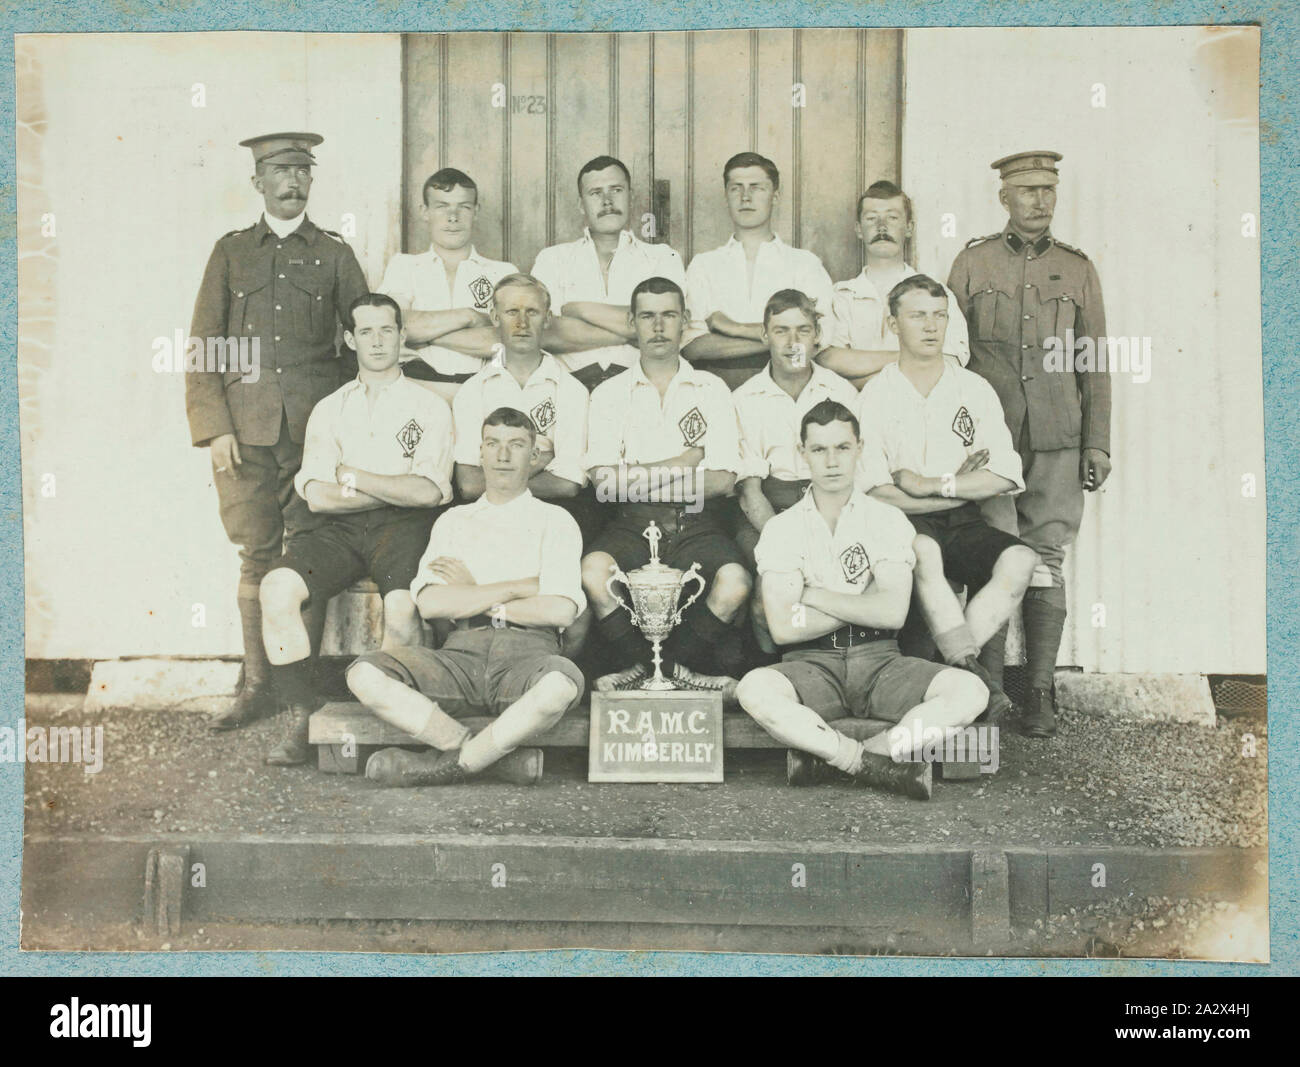 Photograph - Royal Army Medical Corps Sporting Group, Kimberley, South Africa, circa 1902, One of 74 black and white photographs contained within a hard-covered photograph album. Inscribed on front page of the album 'M.G.A. Warner'. Belonged to Sister Mabel Ashton Warner, who served in Queen Alexandra's Royal Nursing Service. Photographs are glued into album, and are generally very faded. Some appear commercially-produced; others are rough and amateurish Stock Photo